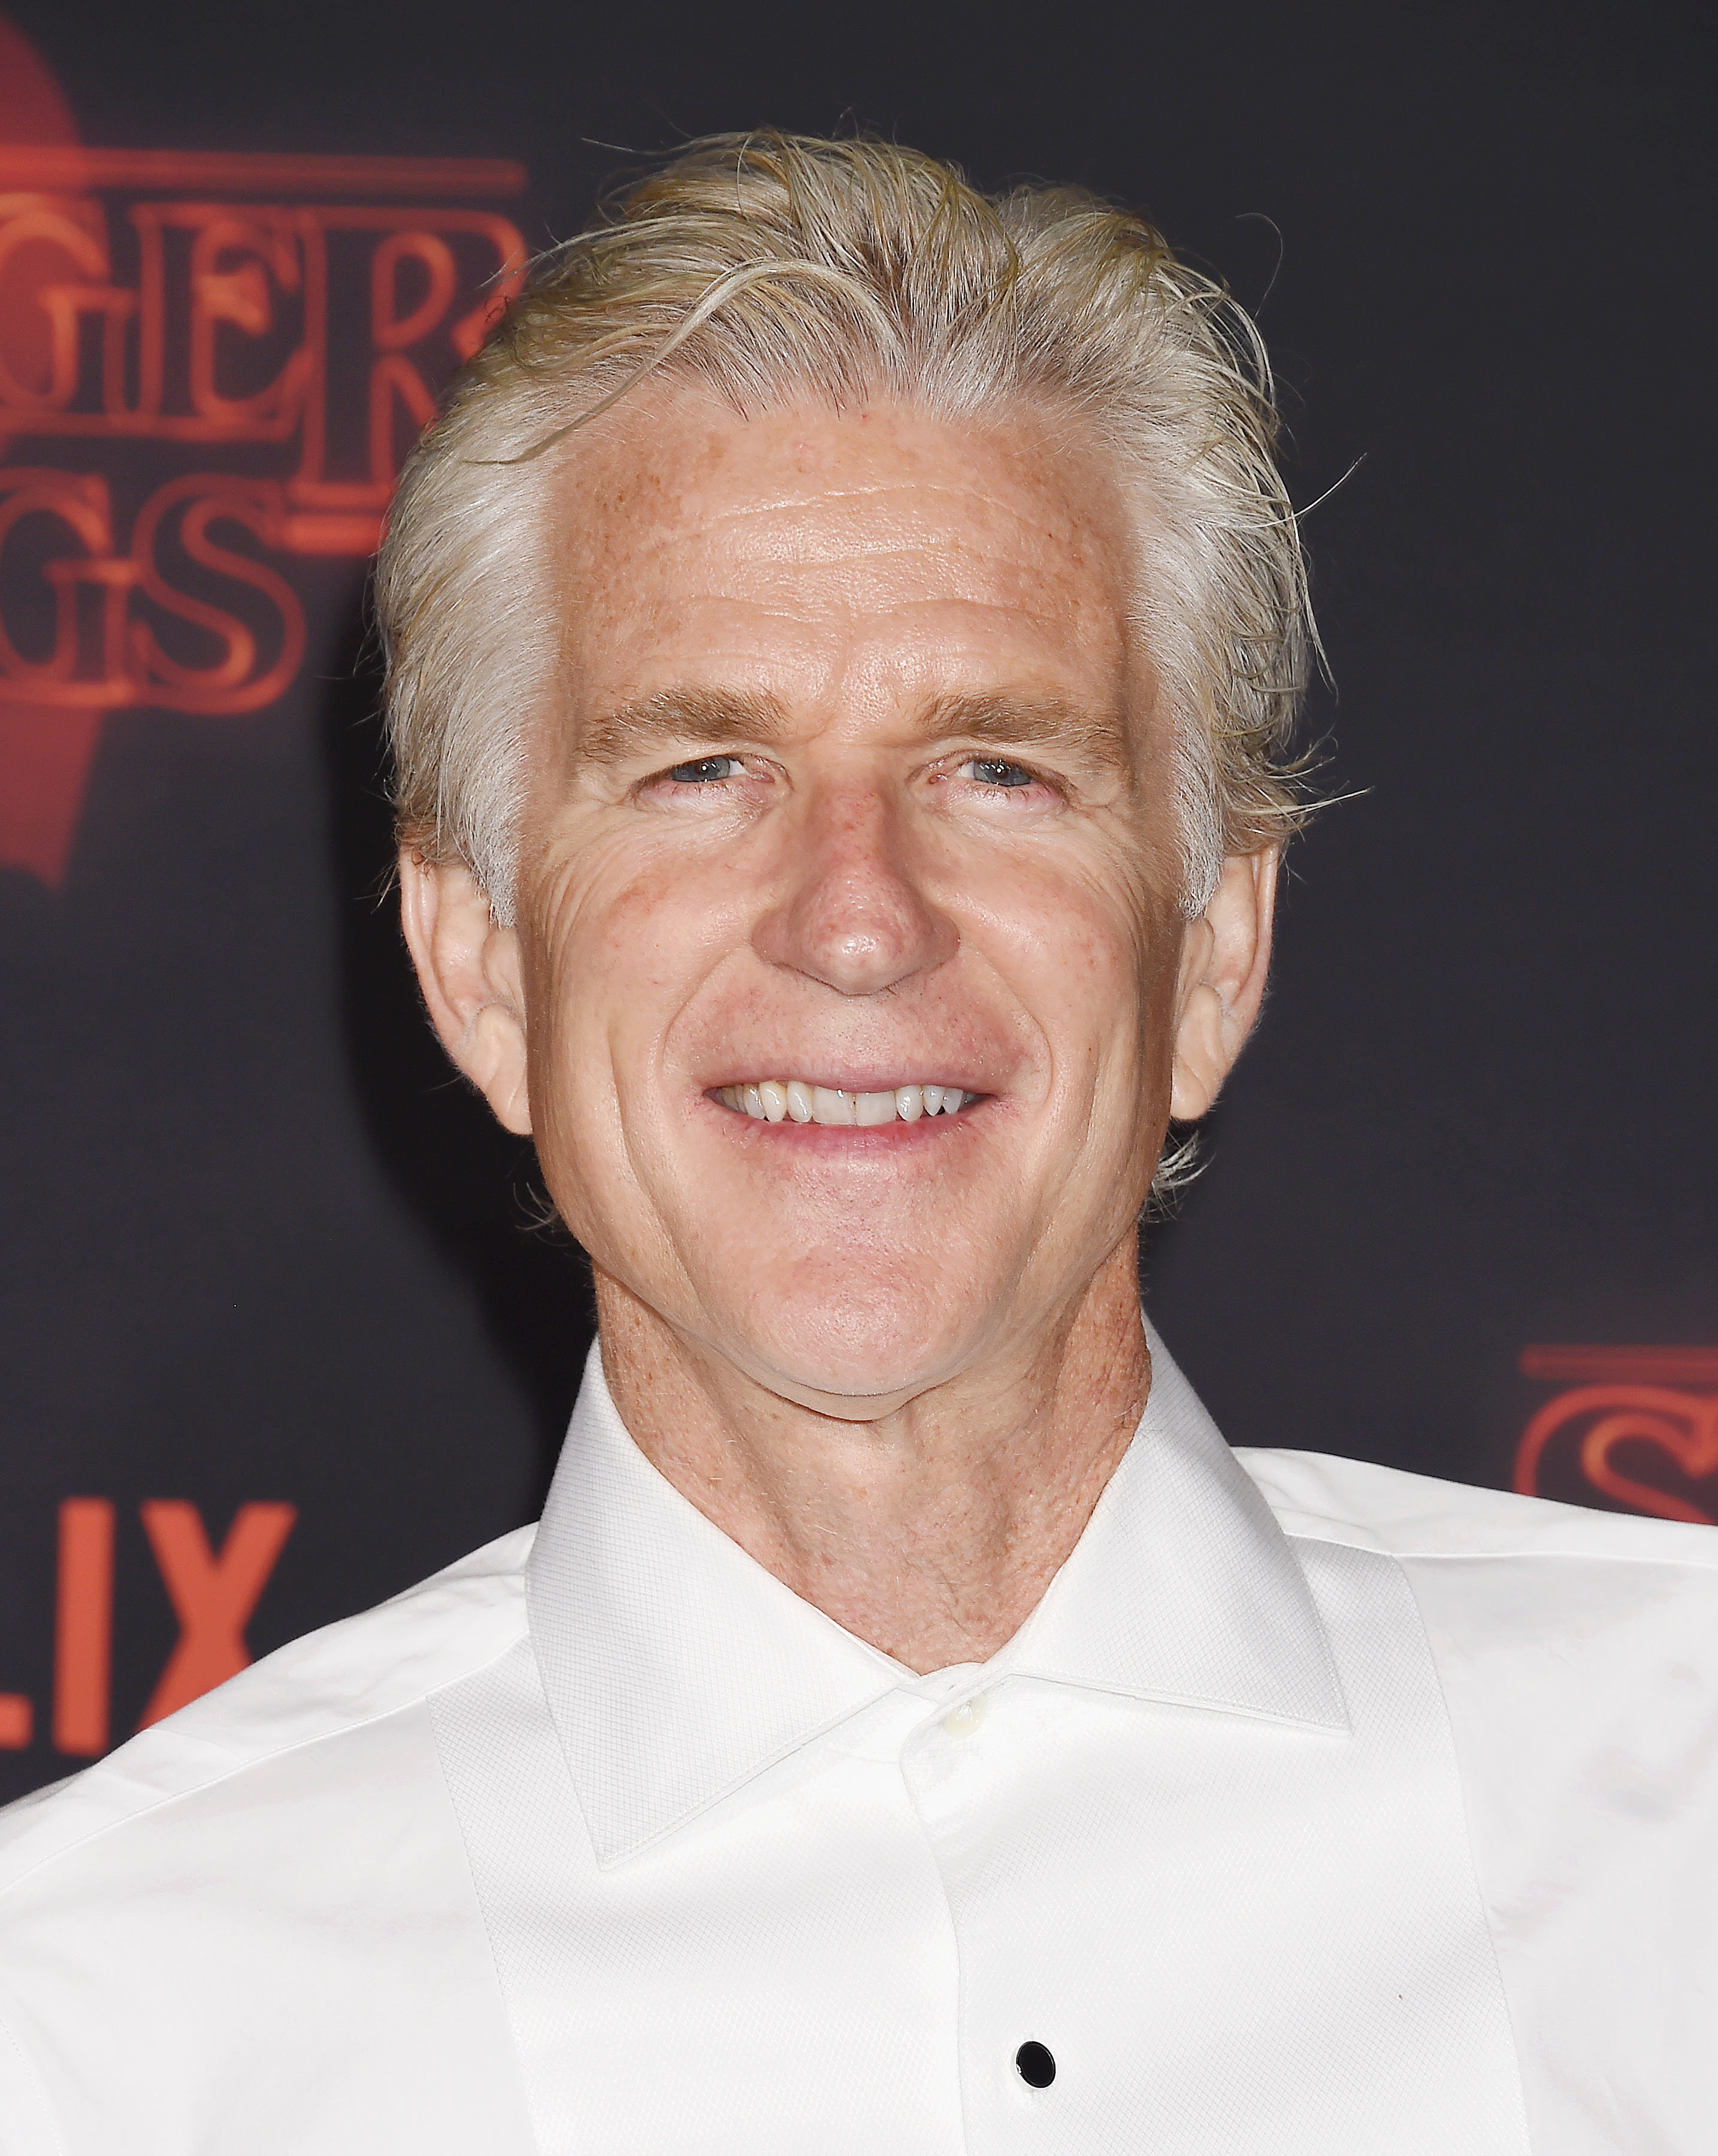 Matthew Modine at an event wearing a classic shirt with a buttoned collar